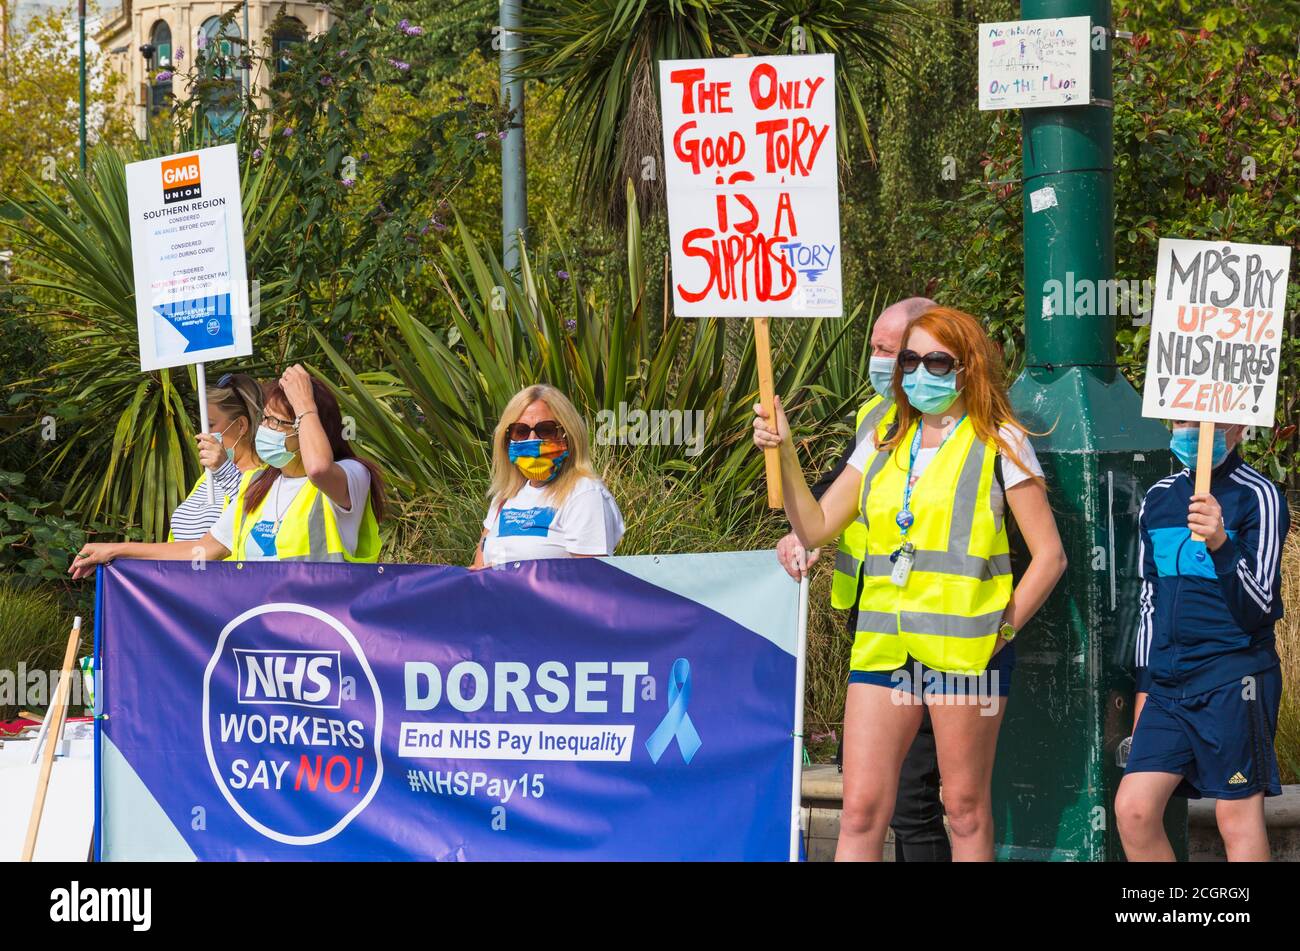 Bournemouth, Dorset UK. 12th September 2020. Dorset NHS Workers Say “No” to public sector inequality after the government made their announcement to give pay rises to other public sectors, but excluded NHS nurses and junior doctors. Many NHS workers feel undervalued and demoralised, overworked and exhausted, putting  their own health and safety at risk during the Covid-19 pandemic. Credit: Carolyn Jenkins/Alamy Live News Stock Photo